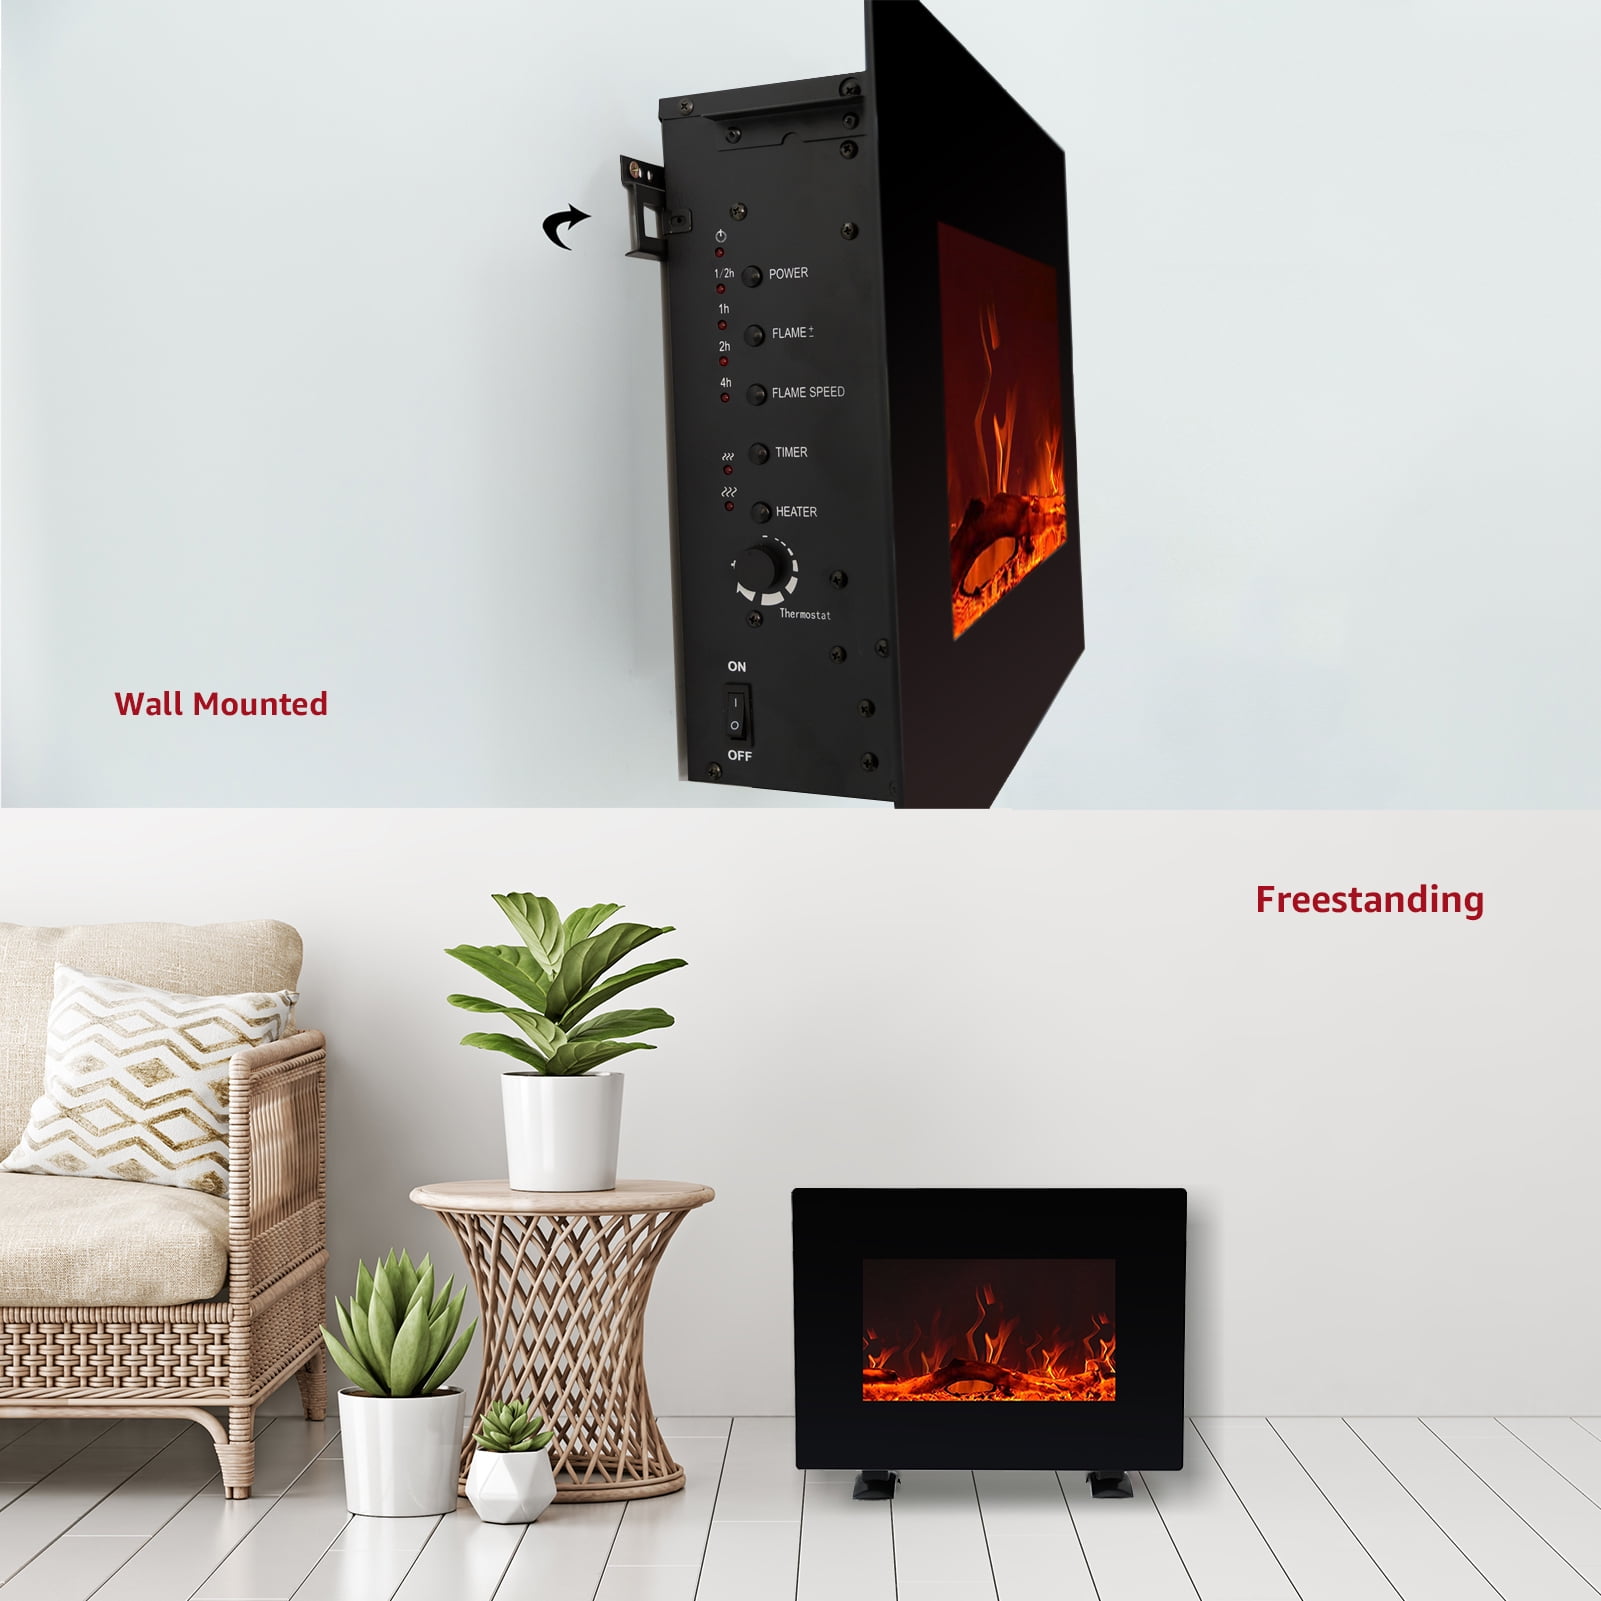 2018 Wall Mounted Electric Fireplace Pebble Effect Embedded Glass Heater Fire Flame Remote Control,1KW&2KW; 220V-240V 